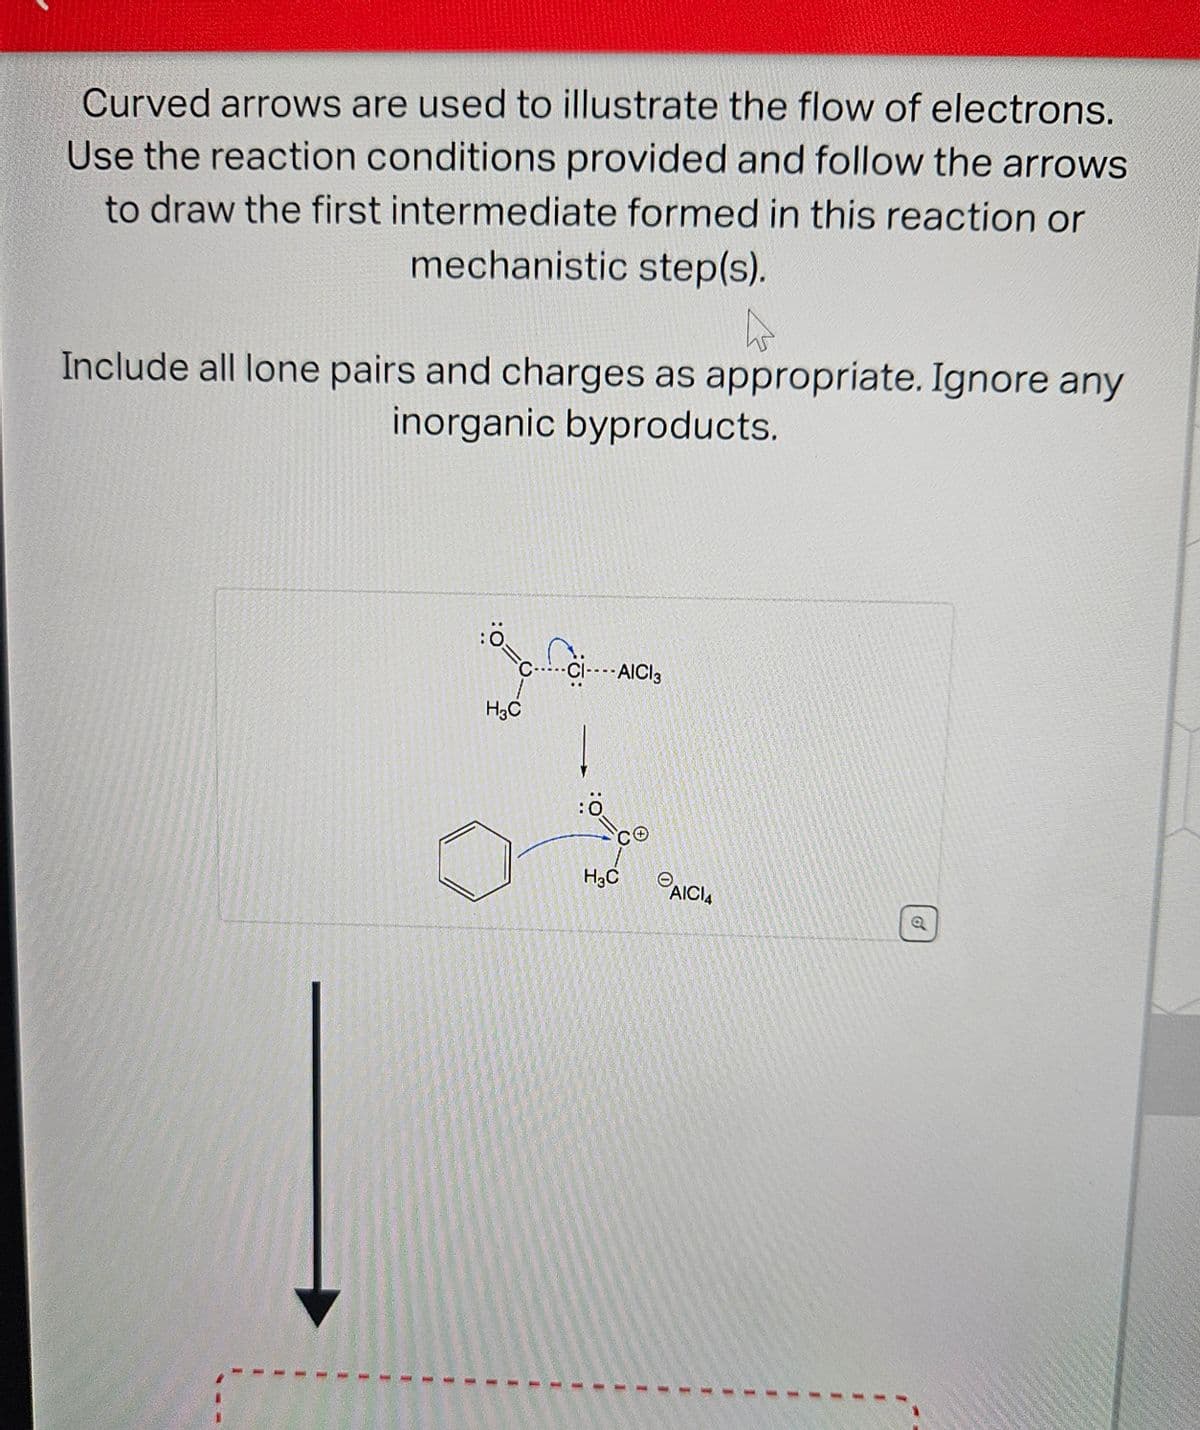 Curved arrows are used to illustrate the flow of electrons.
Use the reaction conditions provided and follow the arrows
to draw the first intermediate formed in this reaction or
mechanistic step(s).
4
Include all lone pairs and charges as appropriate. Ignore any
inorganic byproducts.
H3C
CI ----AICI3
:0
H₂C
AICI4
1
1
o